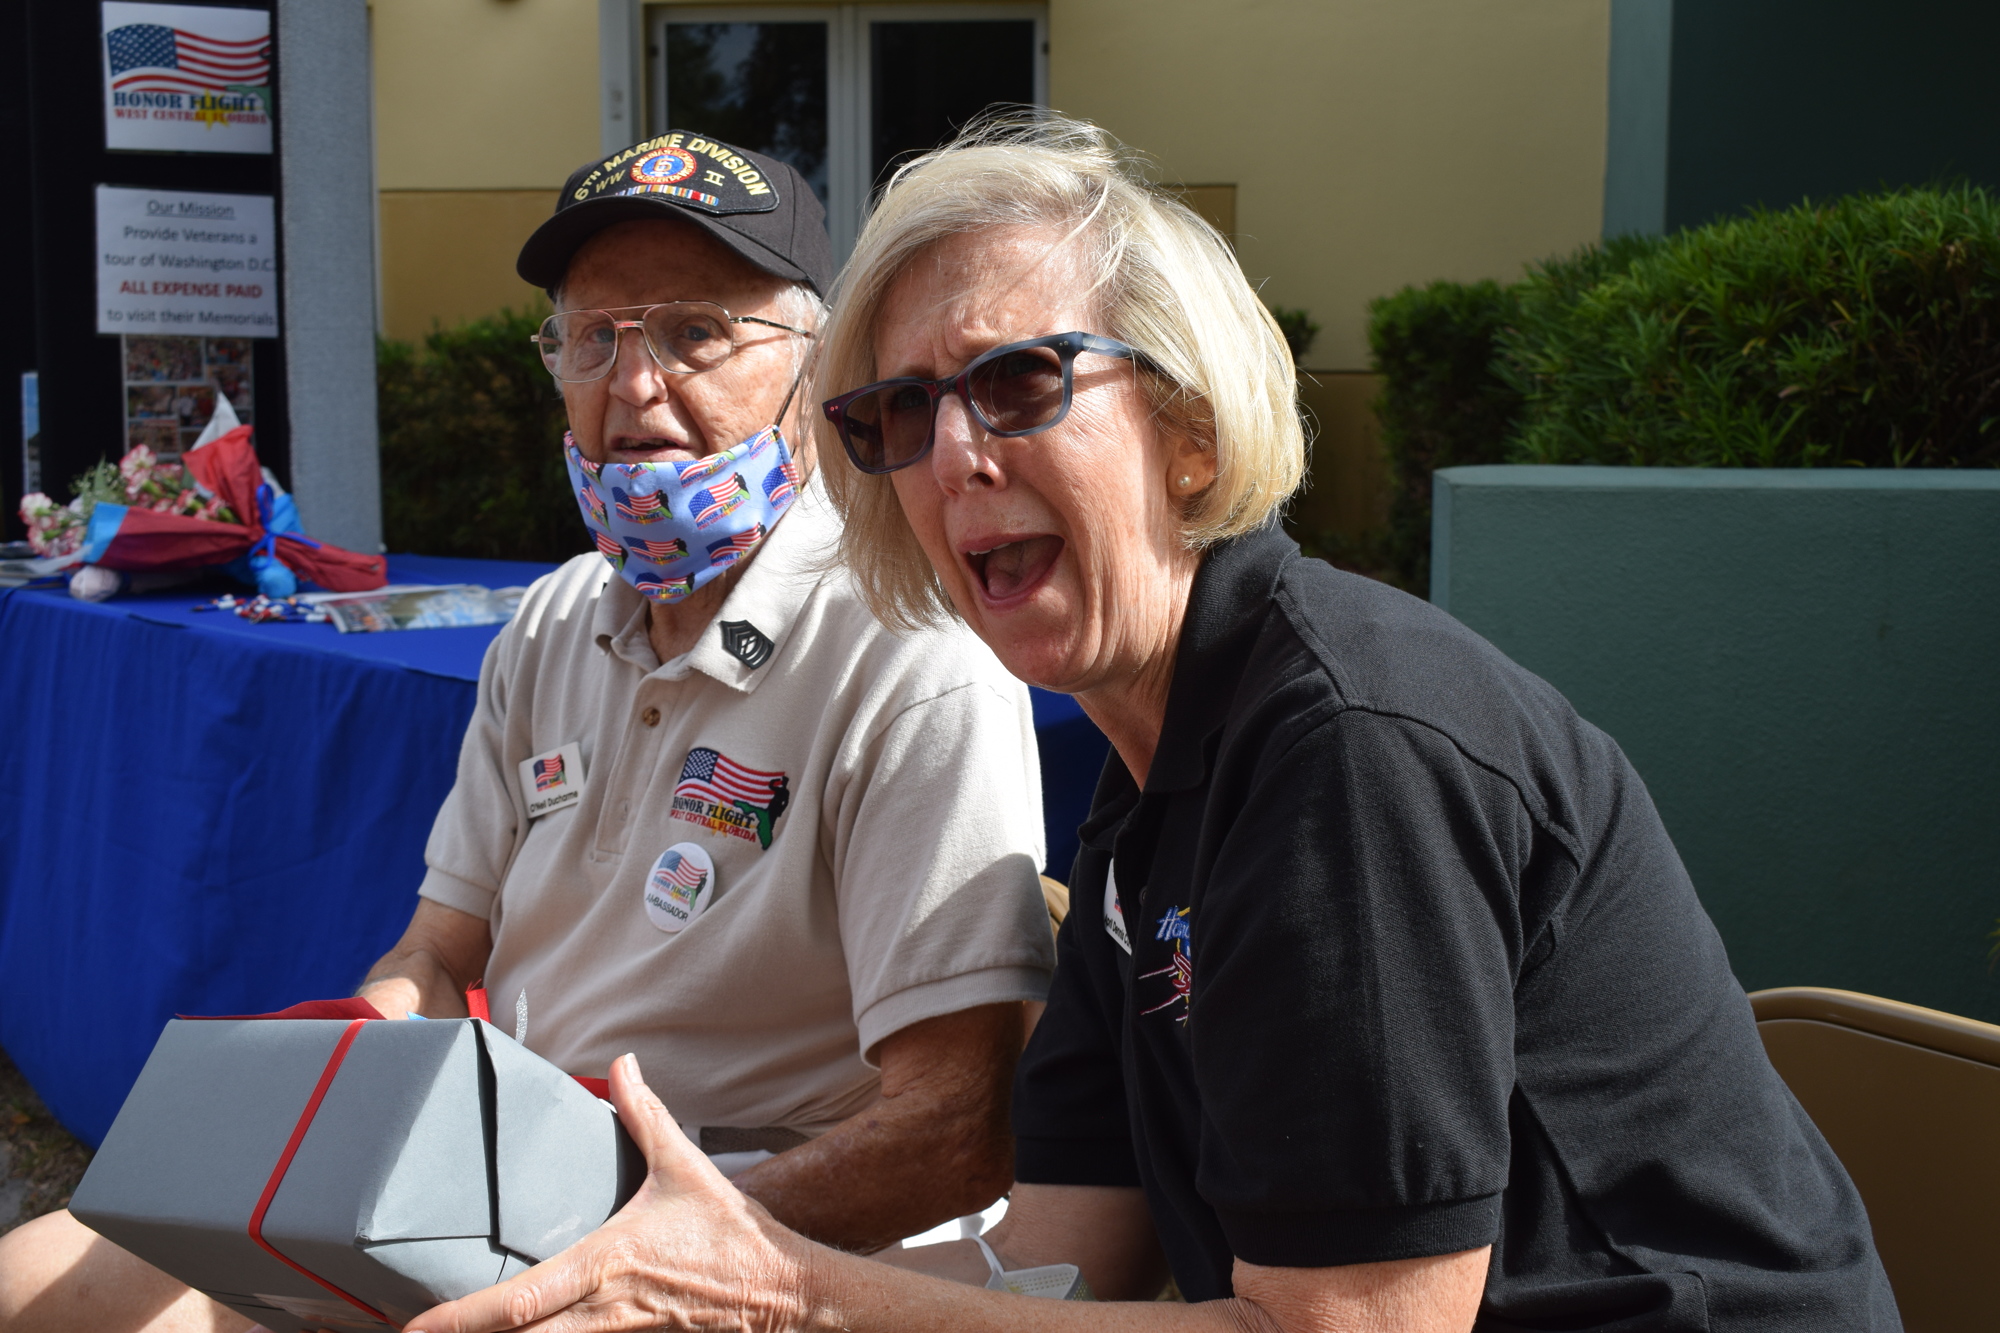 O'Neil Ducharme, a Marine Corps veteran, and April Currie, the president of Honor Flight of West Central Florida, are blown away by the $3,468 donation Olivia Swartling's fifth grade class at McNeal Elementary gave to Honor Flight